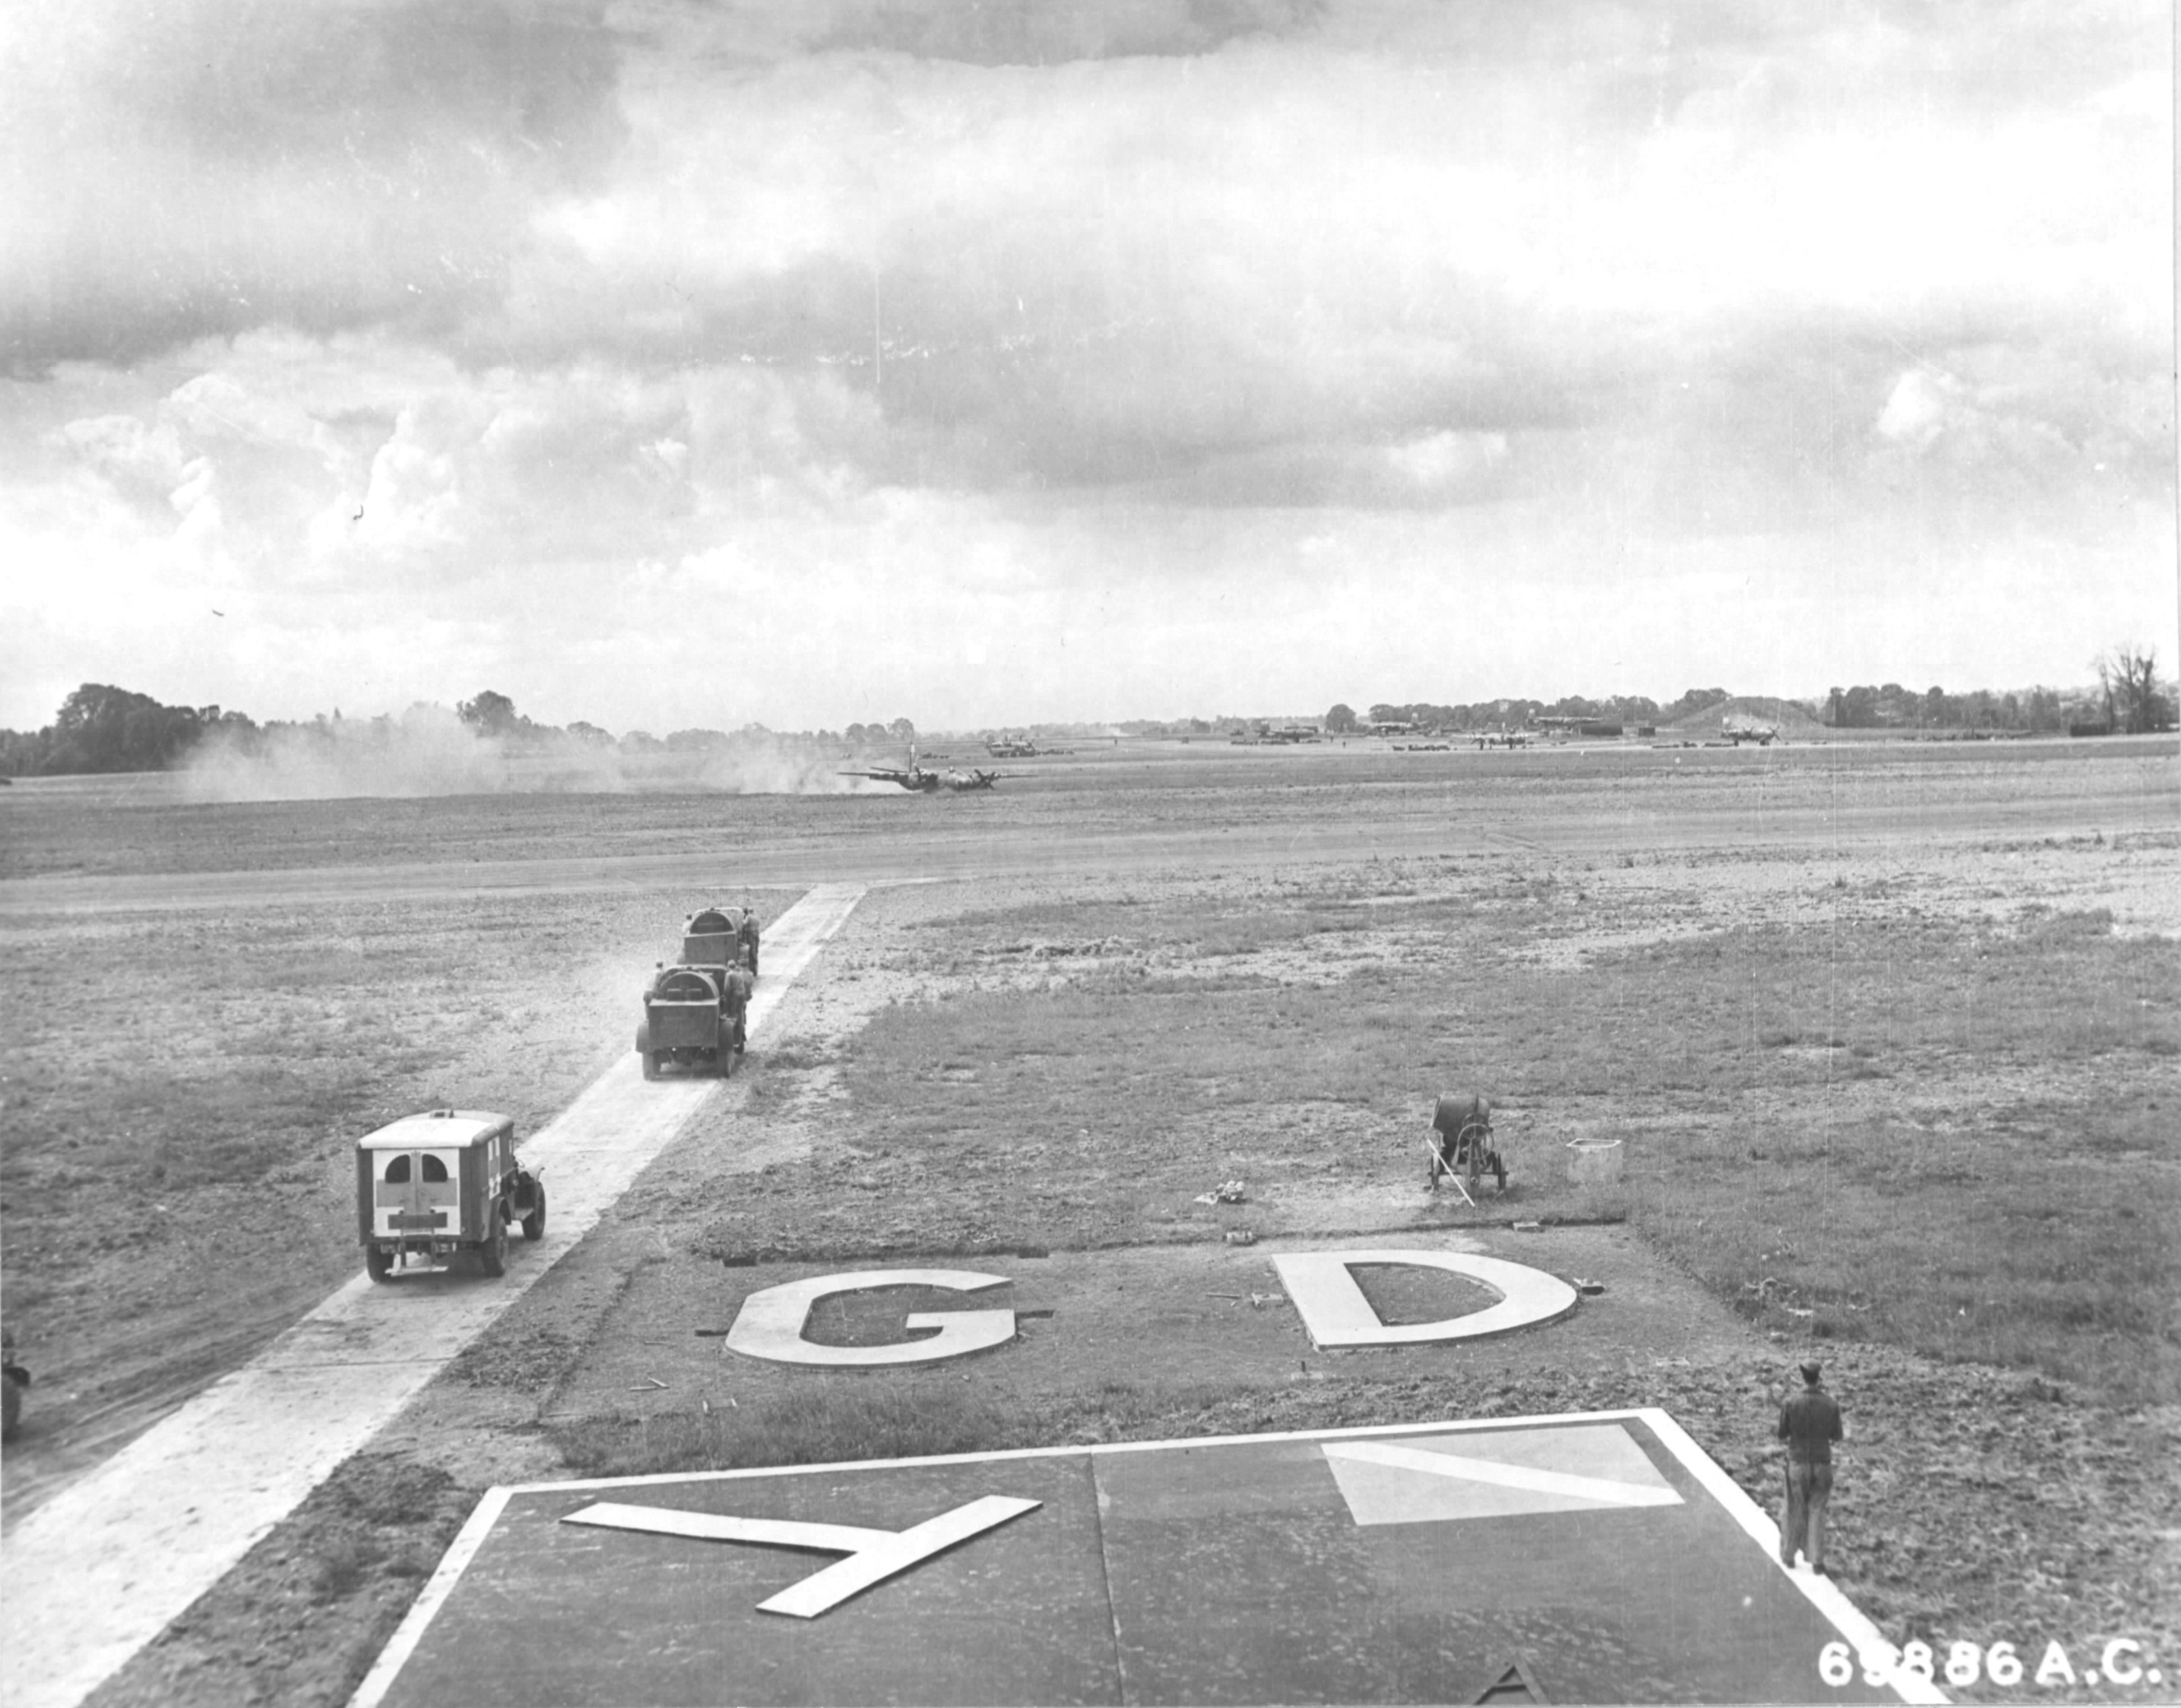 B-26C Marauder “Carefree Carolyn” of the 552nd Bomb Squadron makes a wheels-up landing after having her hydraulics shot out, RAF Great Dunmow, Essex, England, June 15 1944. Note the WC54 Ambulance and fire crews rushing to the scene. Photo 1 of 2